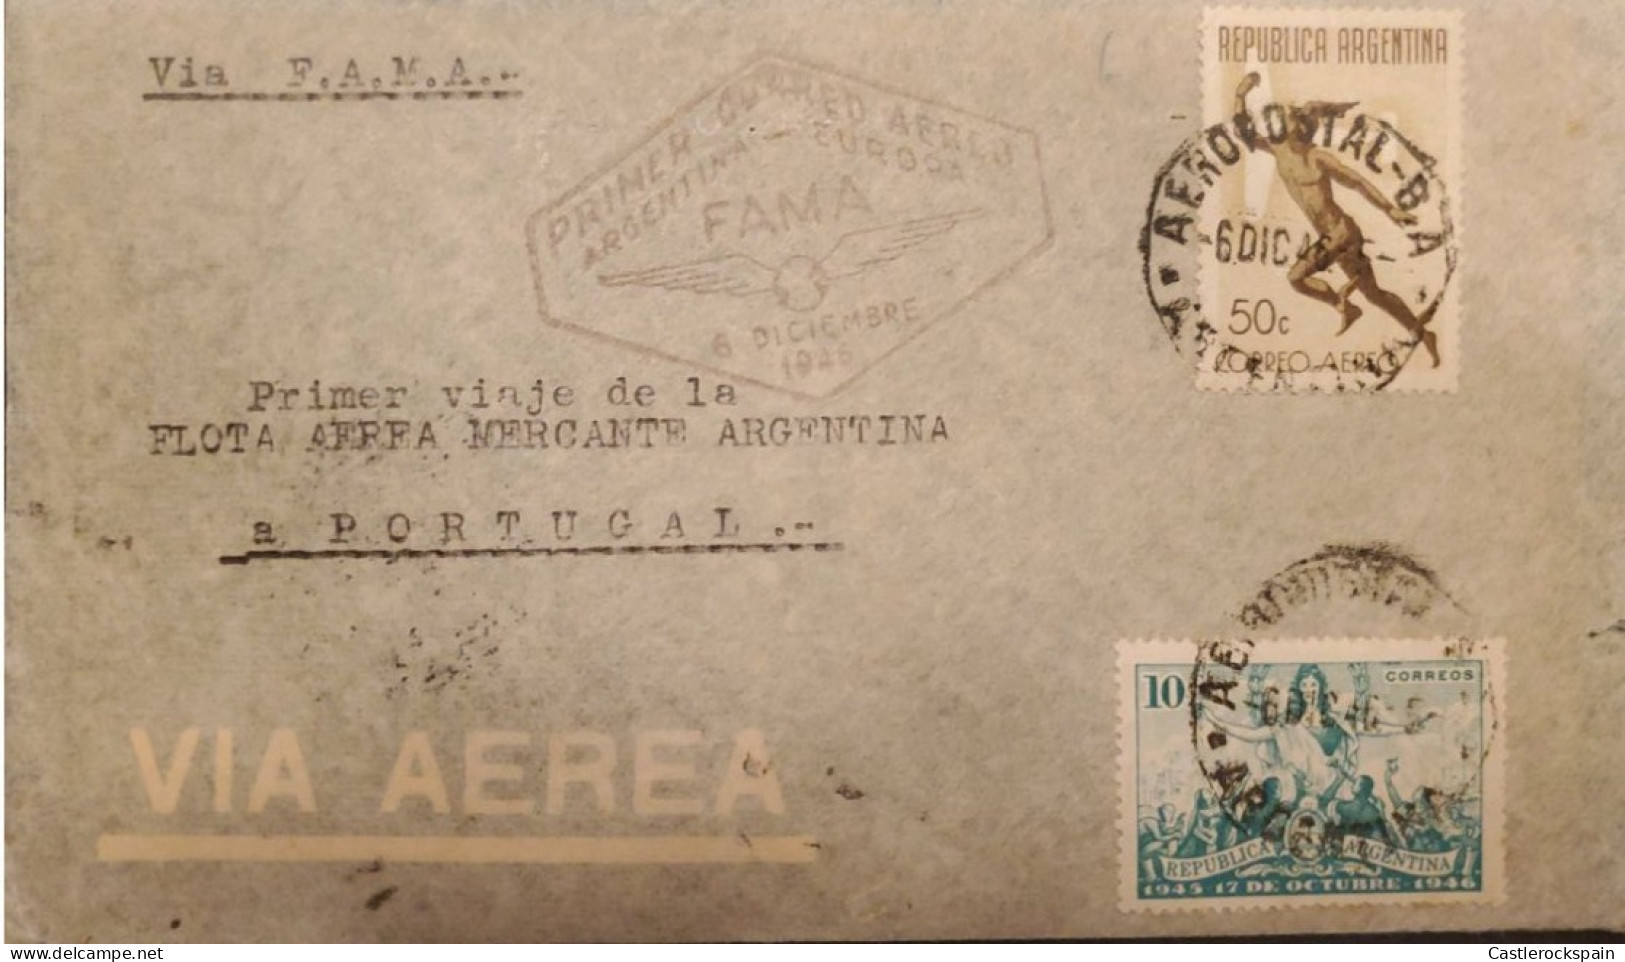 MI) 1946, ARGENTINA, VIA F.A.M.A, AEROPOSTAL, AIR MAIL, FROM BUENOS AIRES TO PORTUGAL, LIBERTY REVOLUTION SALUTING THE P - Usados